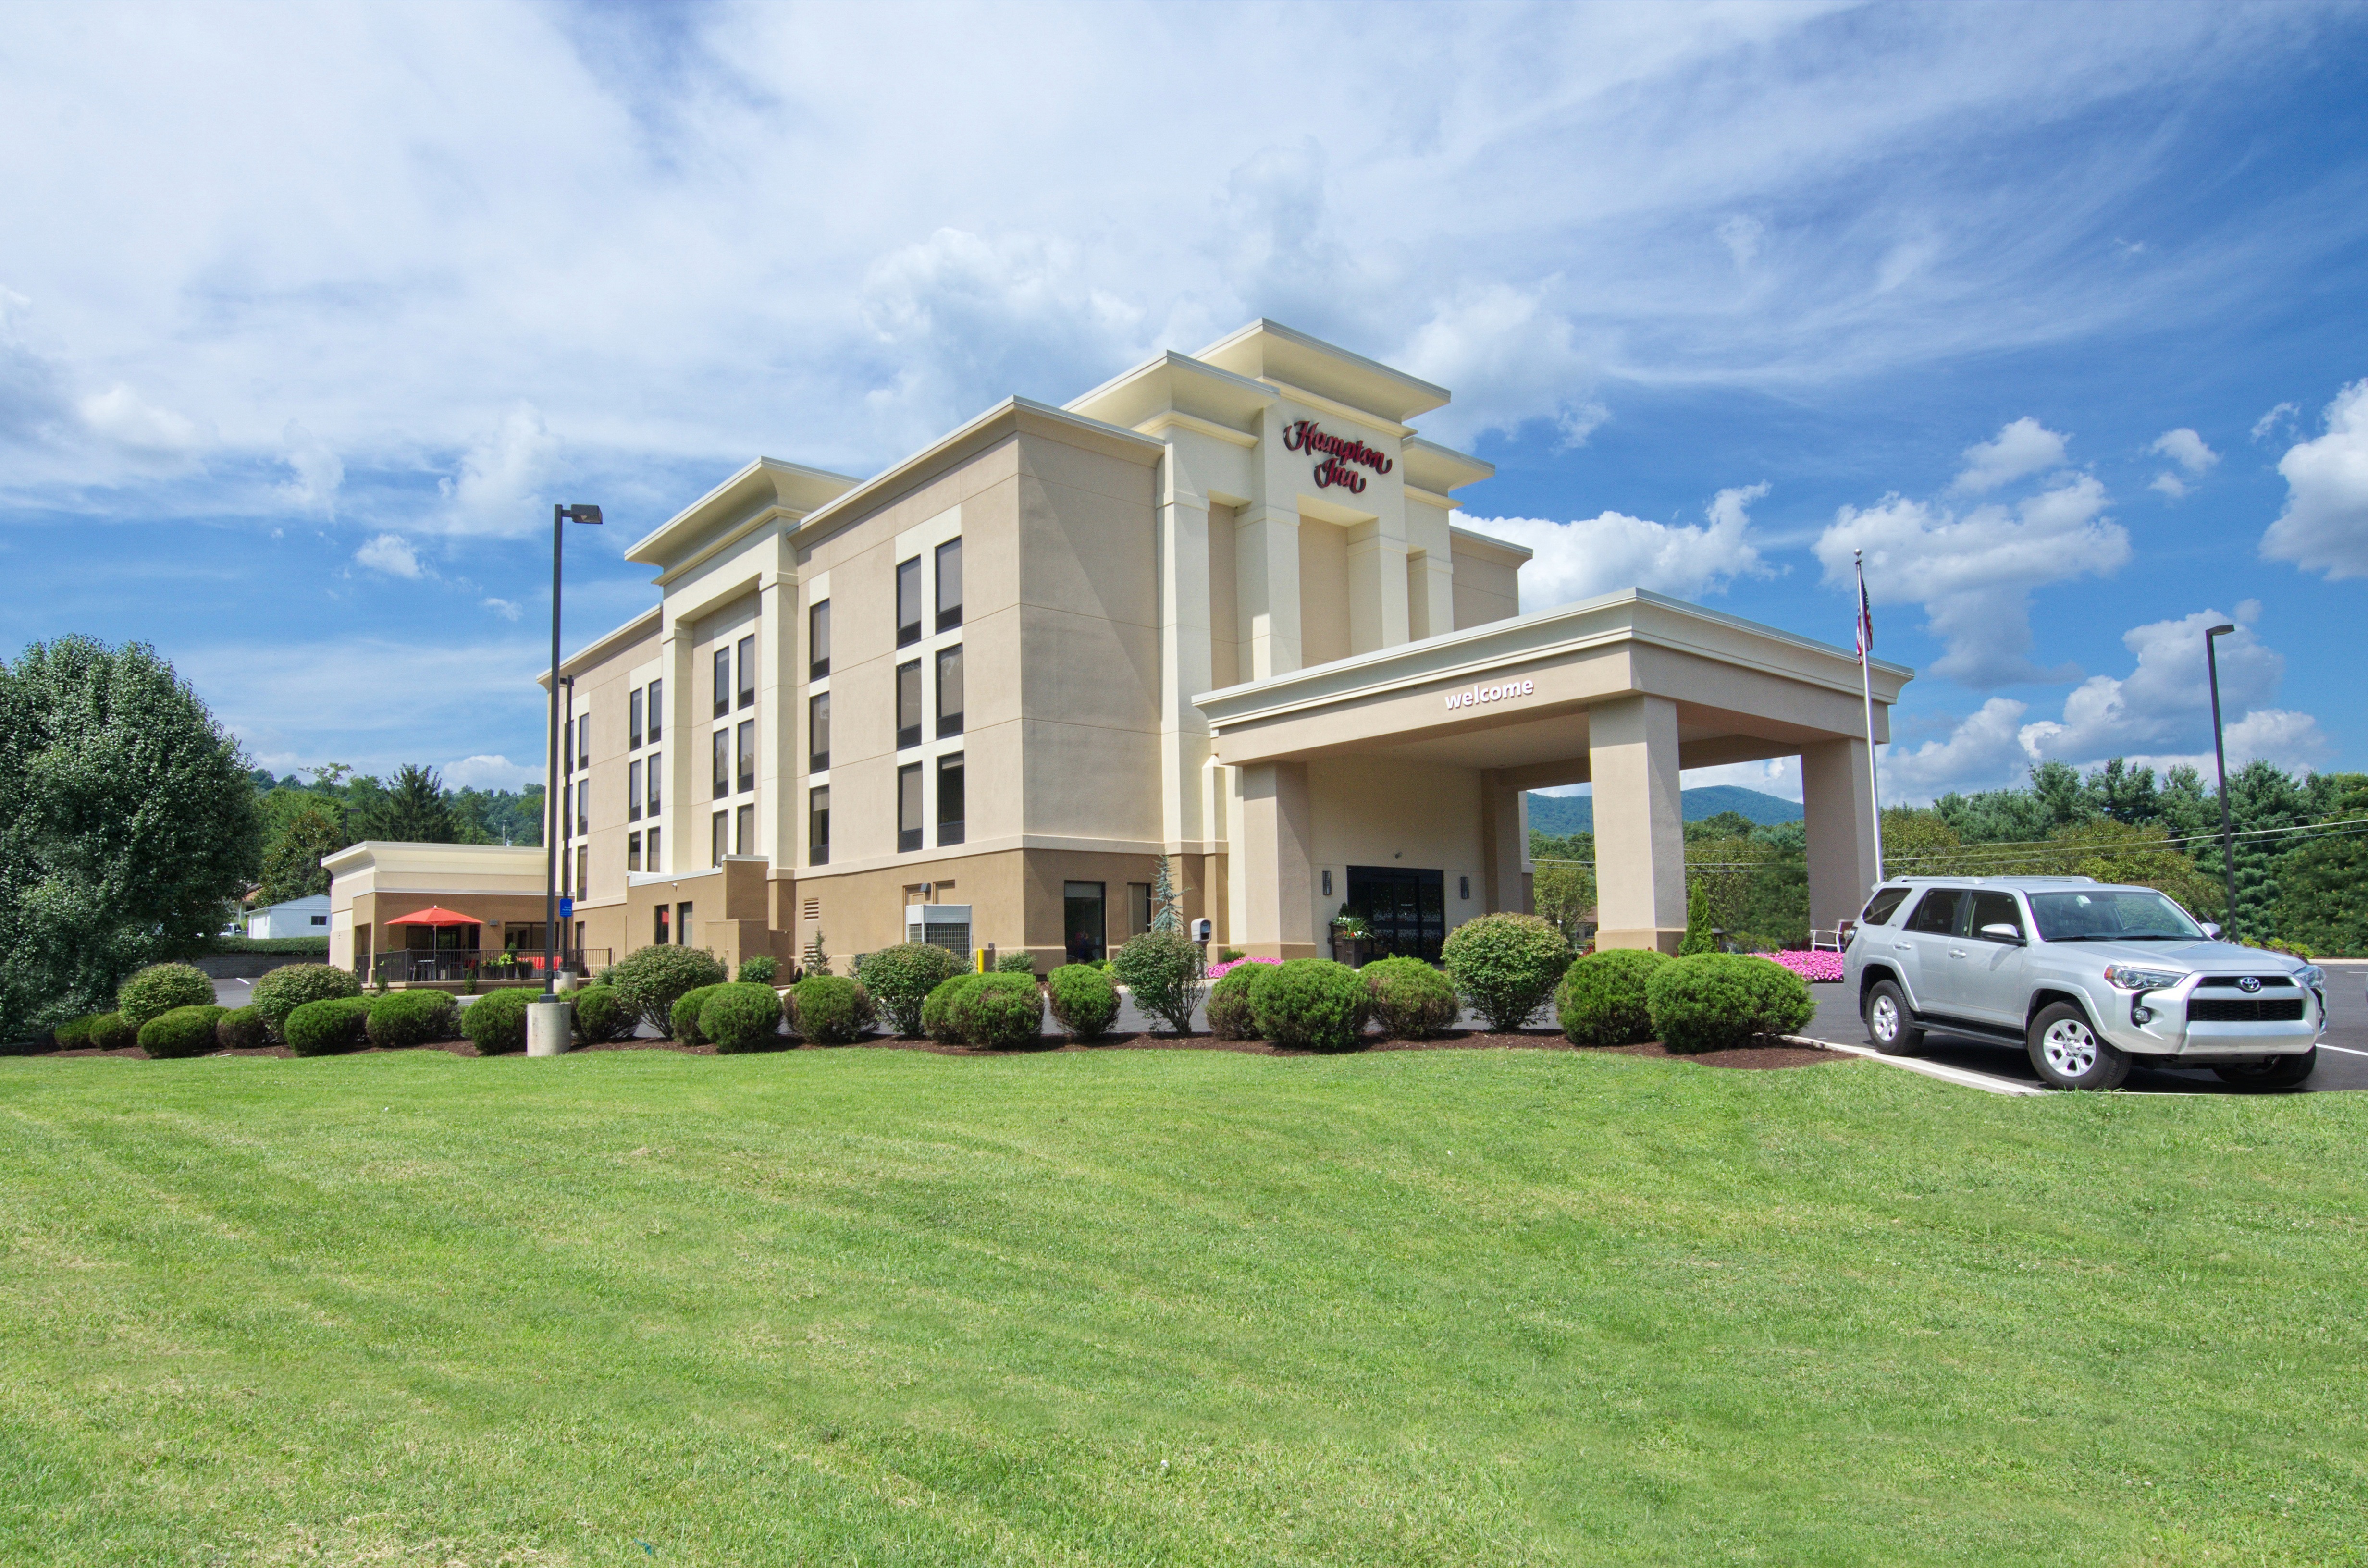 Hotel Building Exterior with Front Lawn